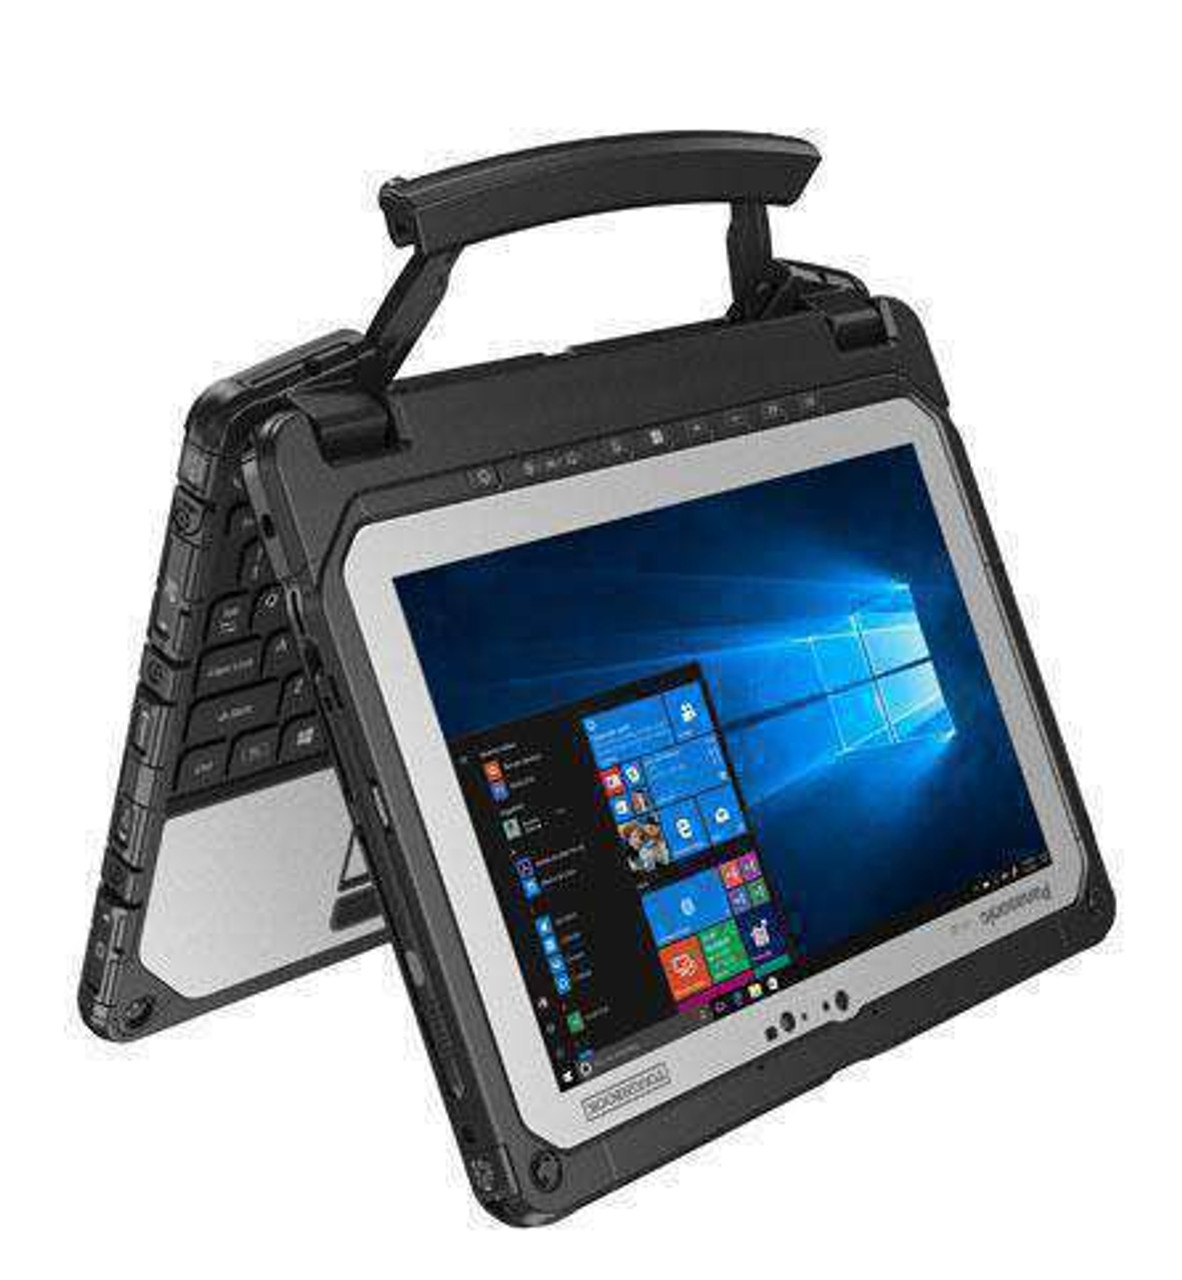 Fully Rugged Panasonic Toughbook 20 - REF.